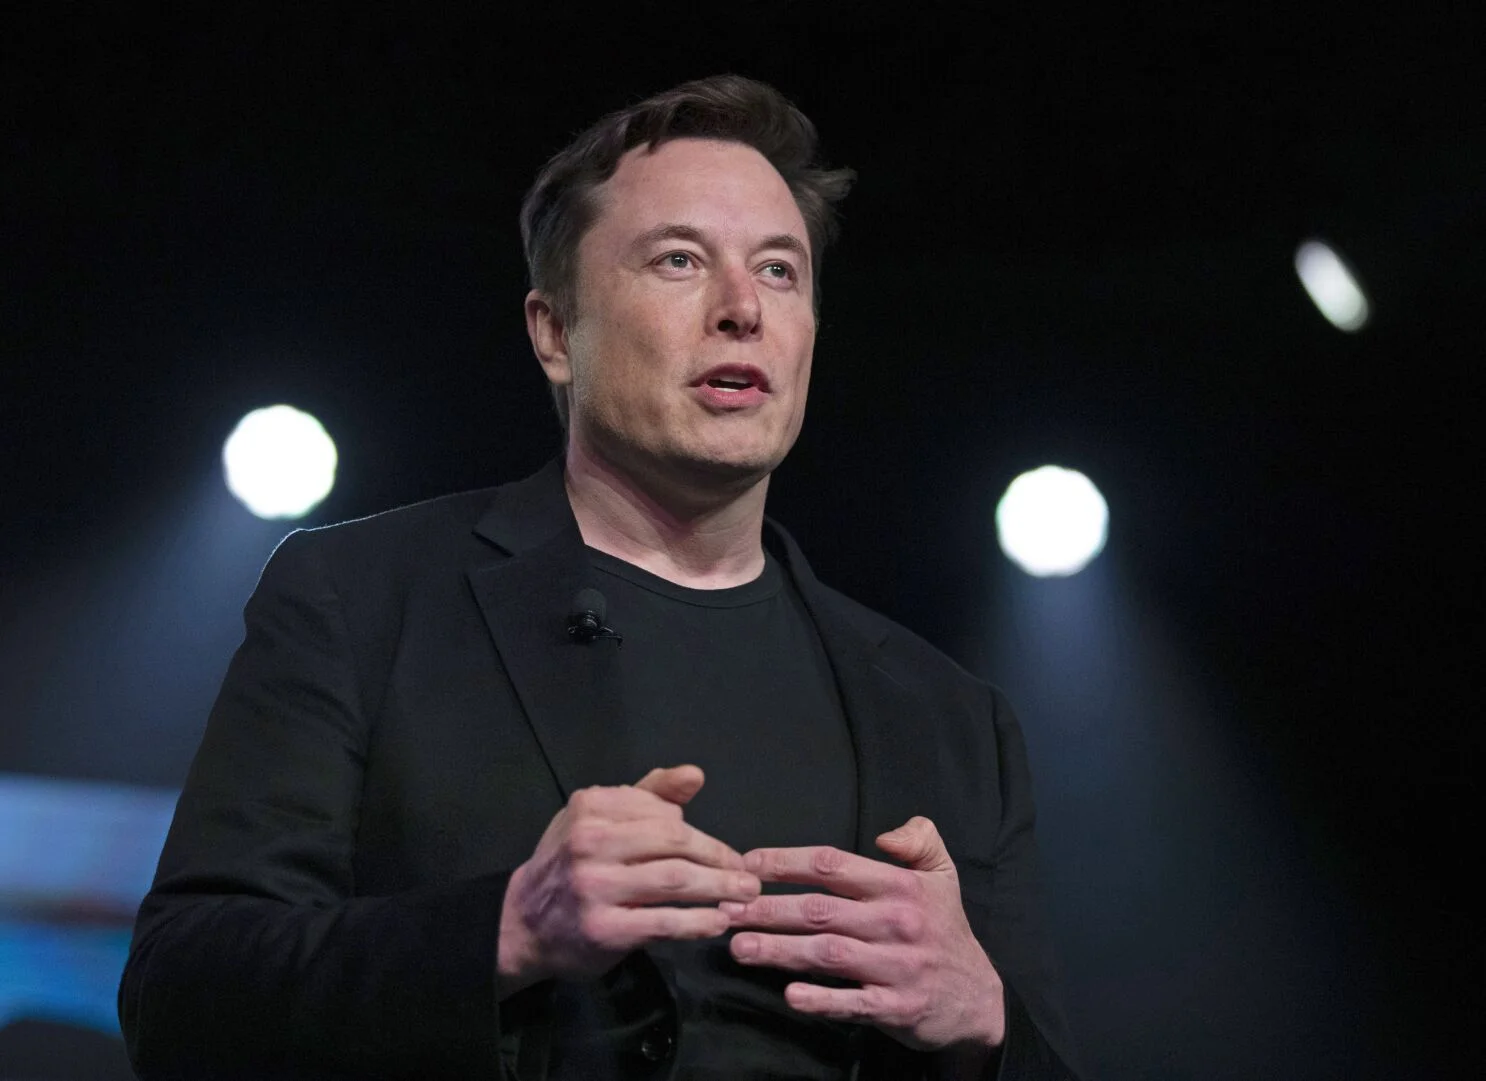 elon-musk-plans-to-launch-truthgpt-chatbot-to-counter-ais-partisan-influence